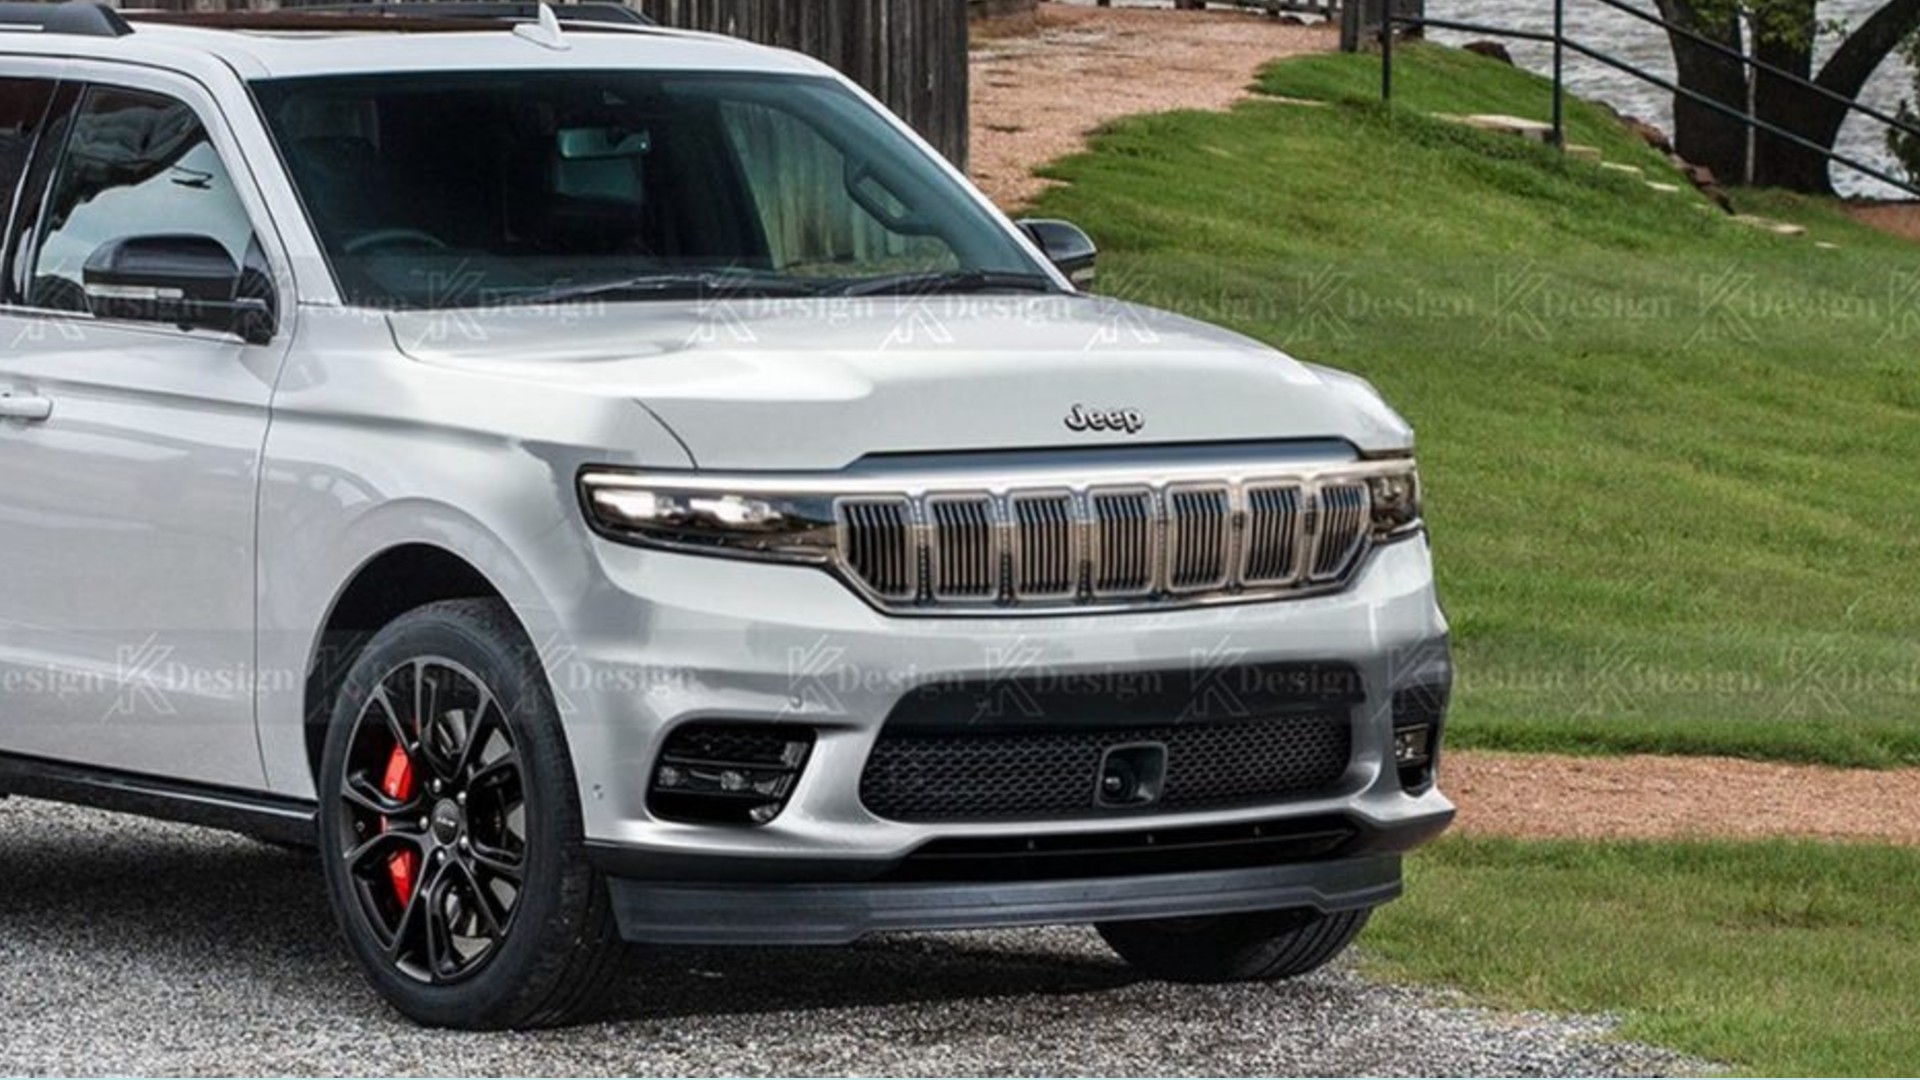 Jeep H6 7-seat SUV to be launched in 2022